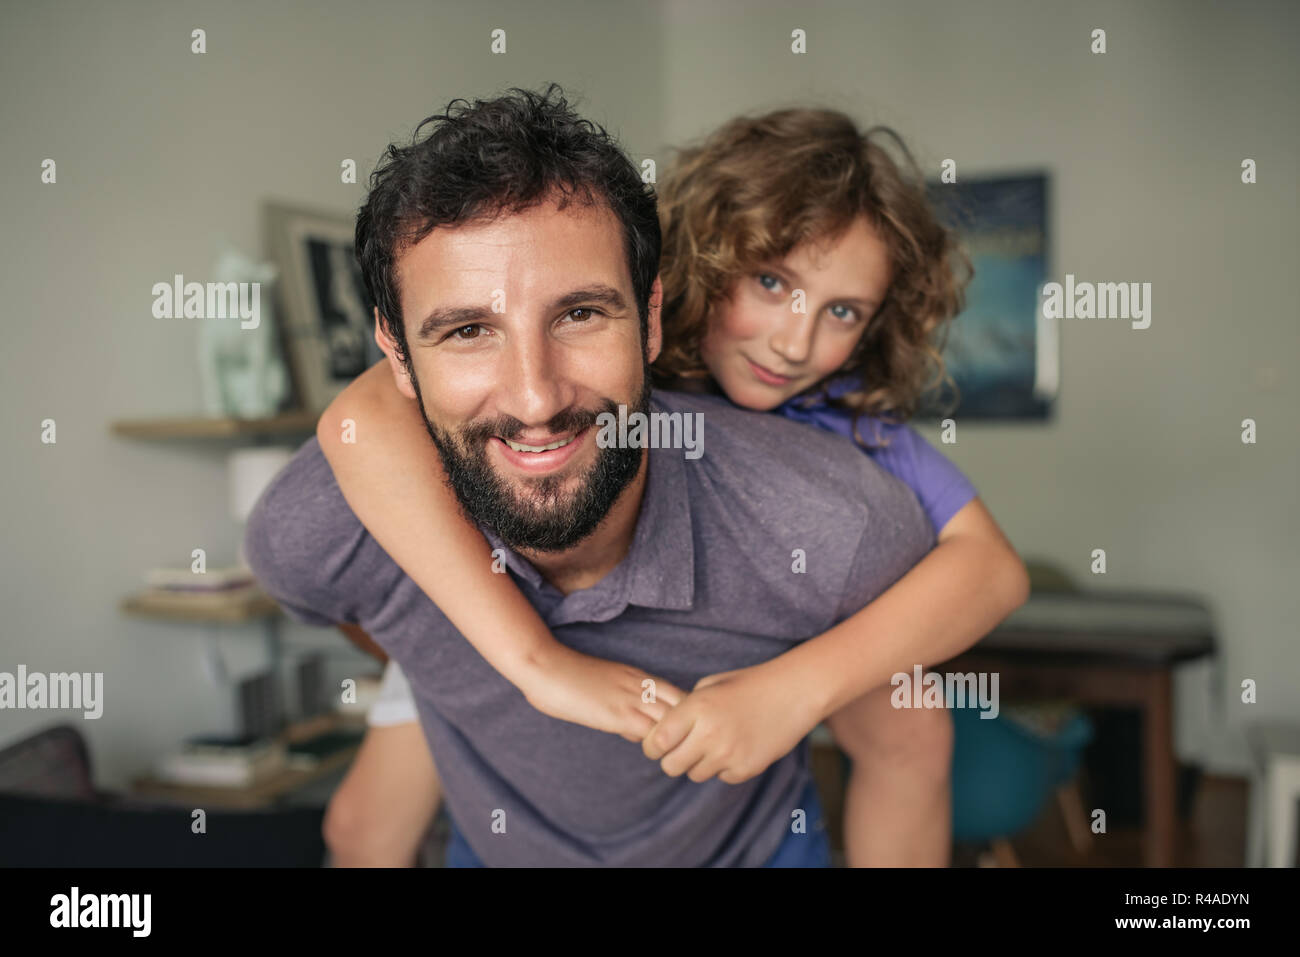 Smiling dad giving his son a piggyback at home Stock Photo